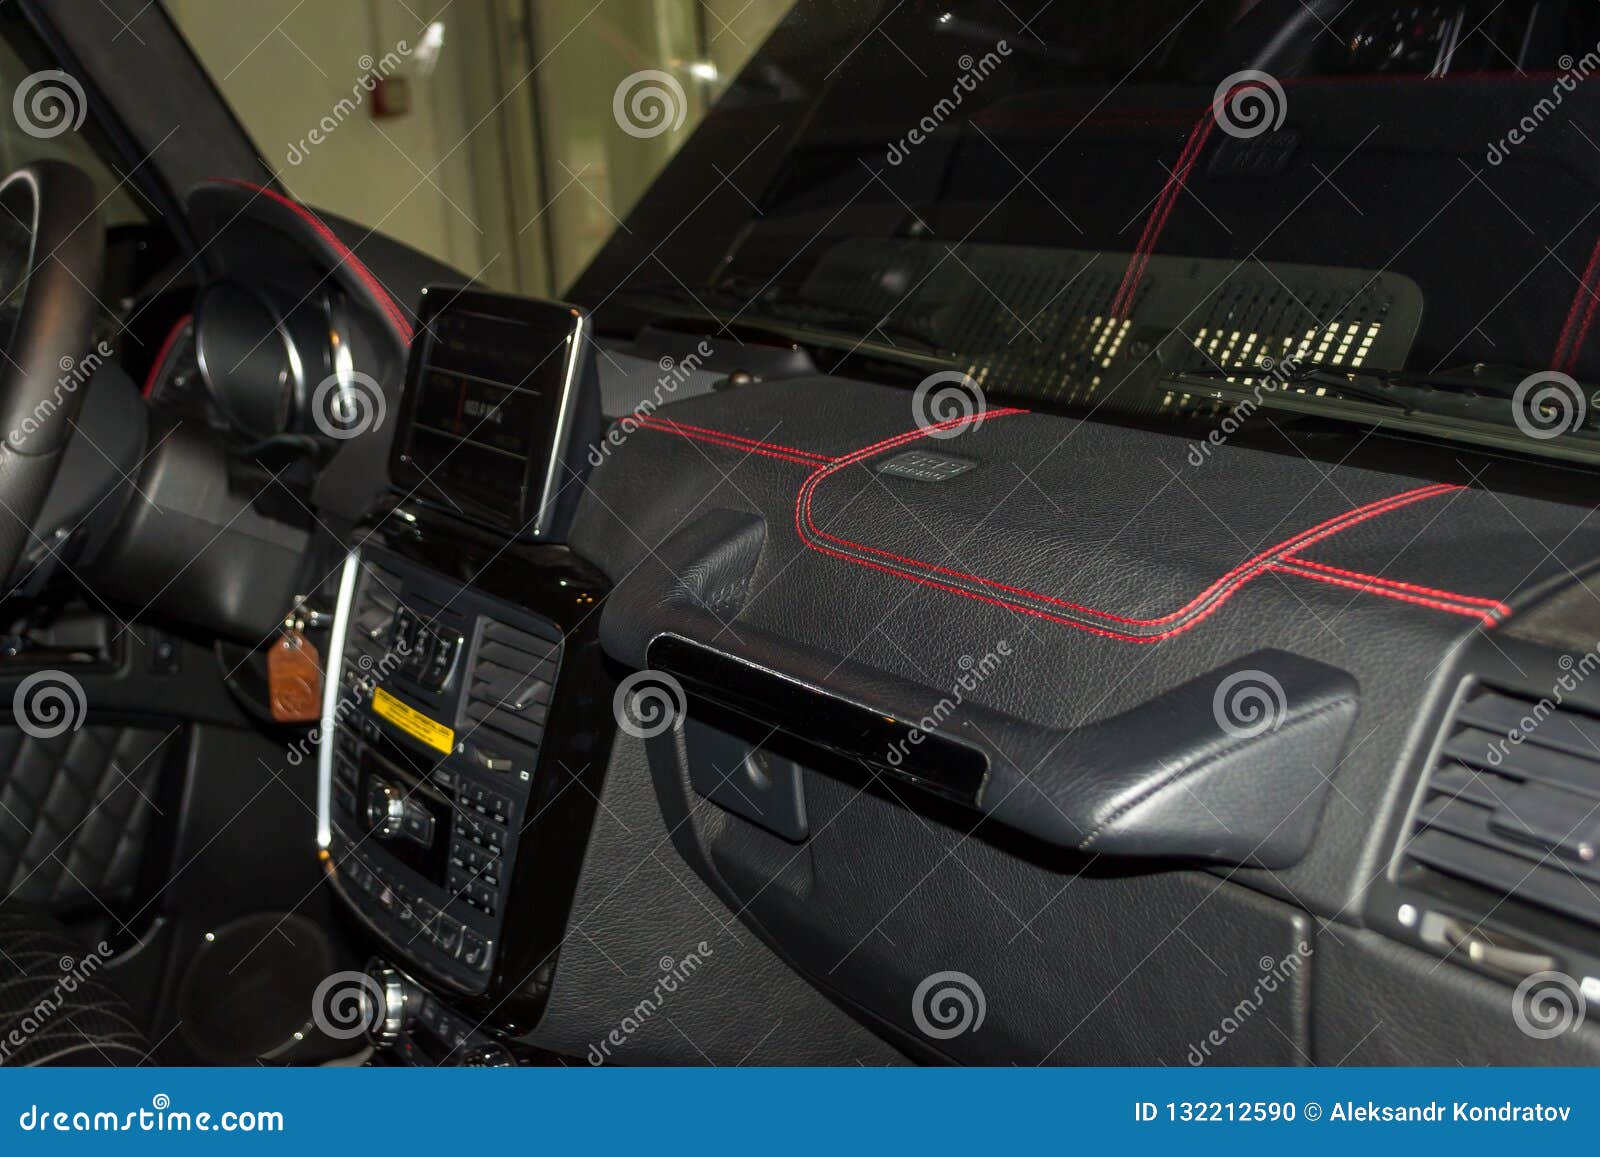 A View Of A Part Of The Interior Of The Car Dashboard From